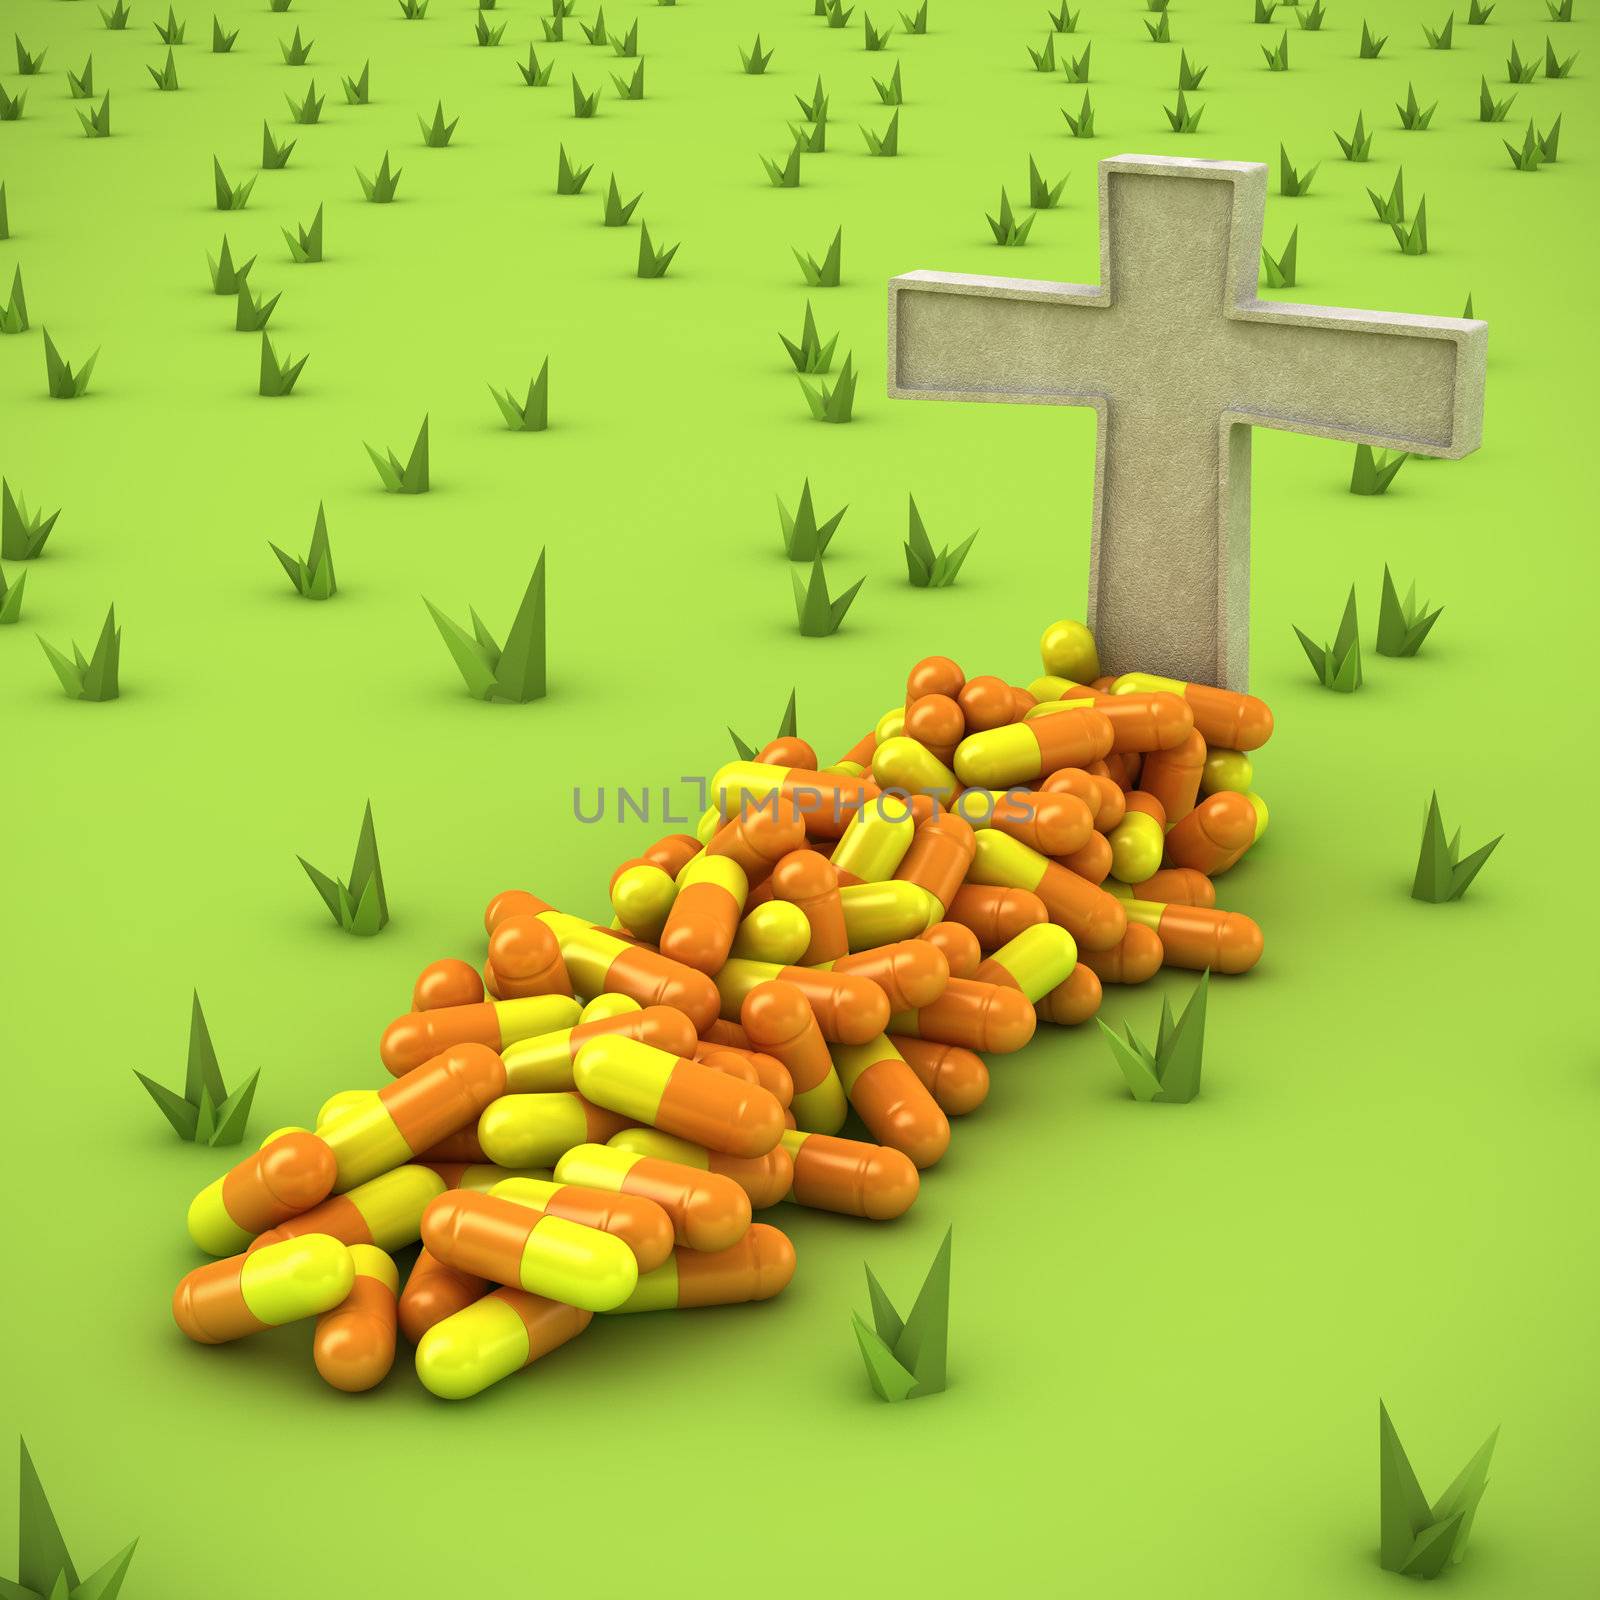 Pharmaceutical grave by timbrk